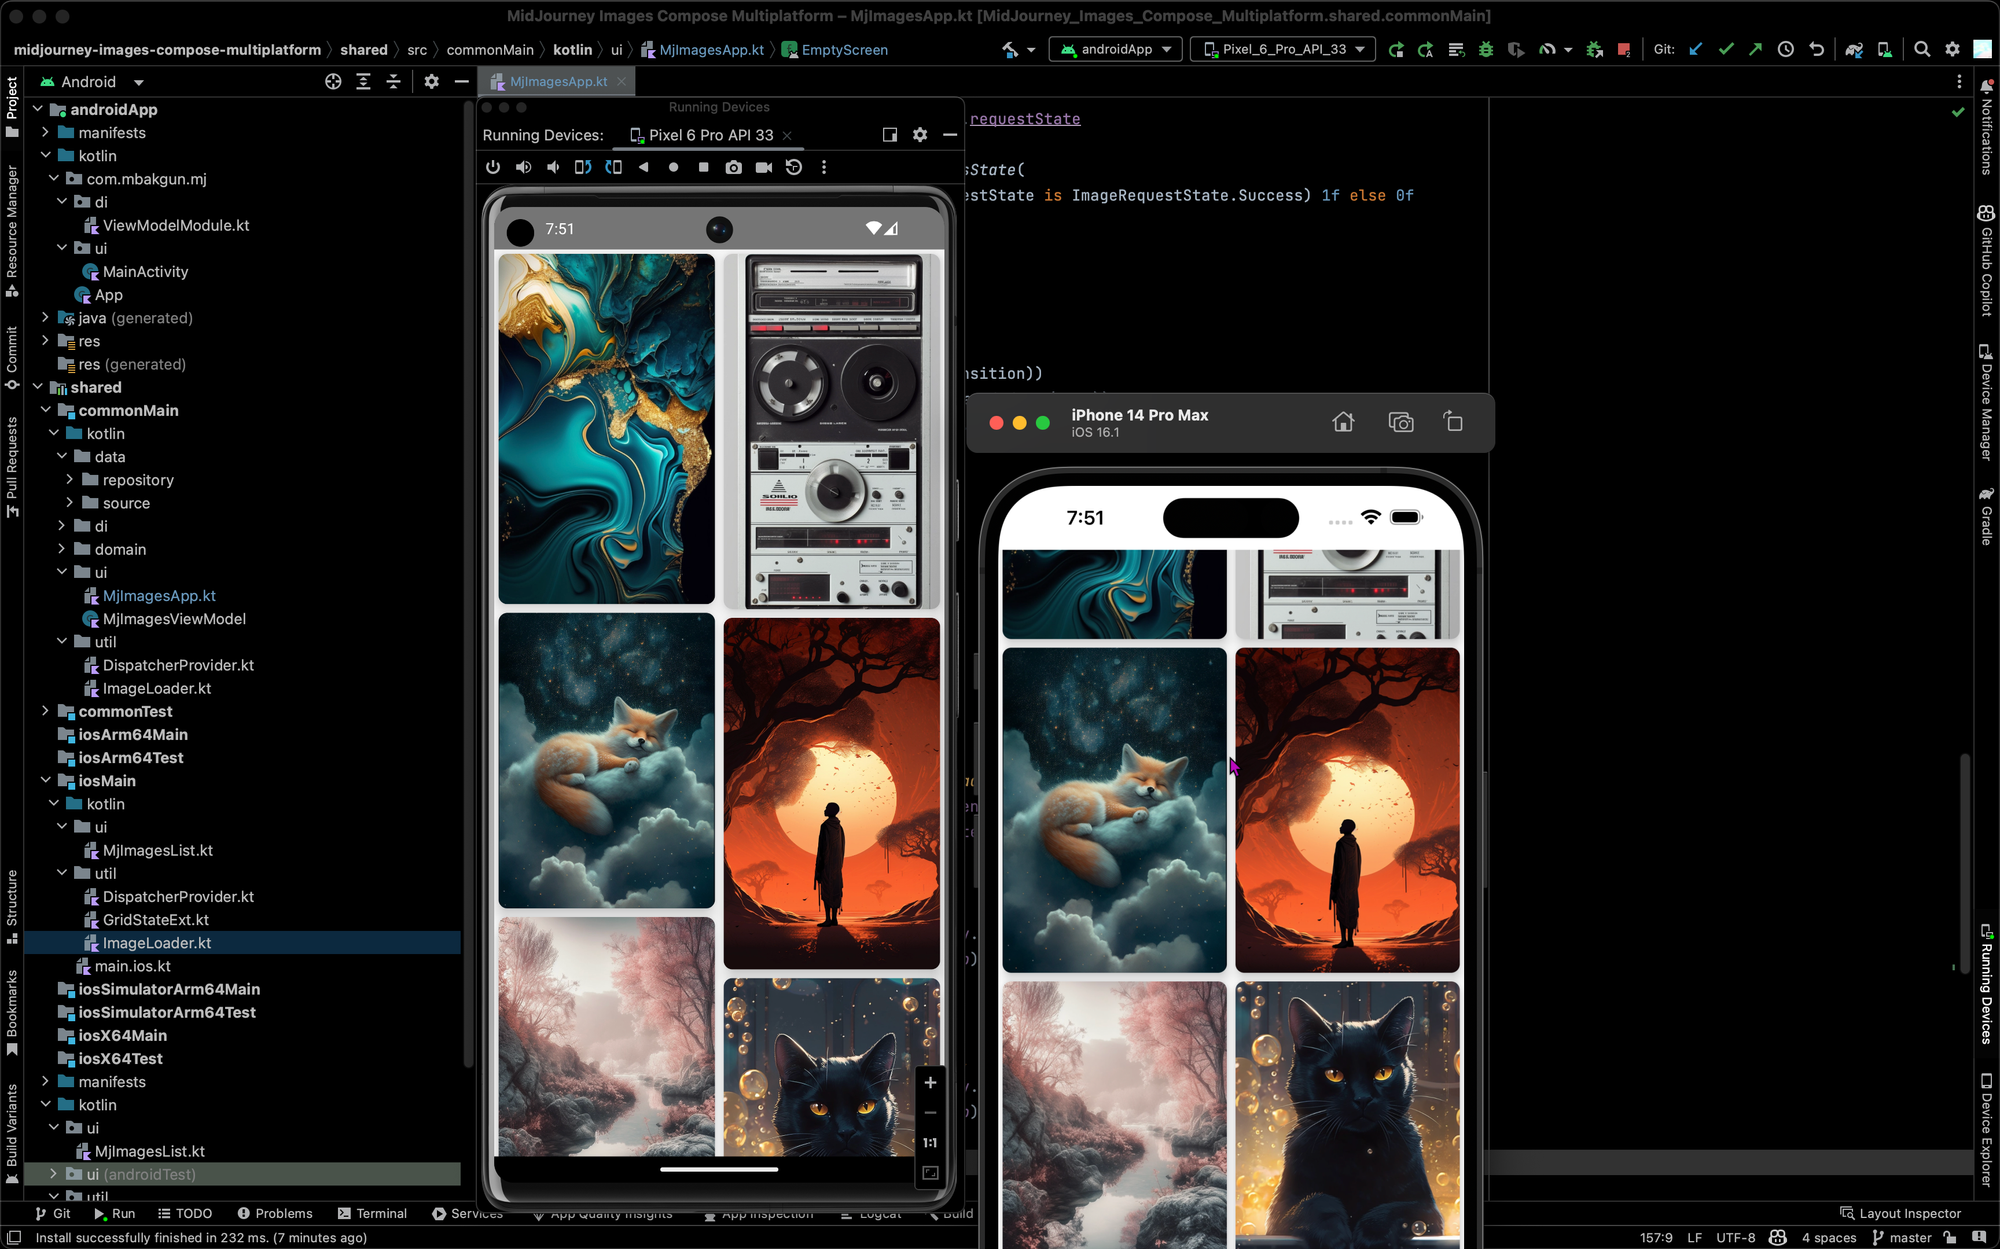 Building a Compose Multiplatform Image Gallery App for Android and iOS